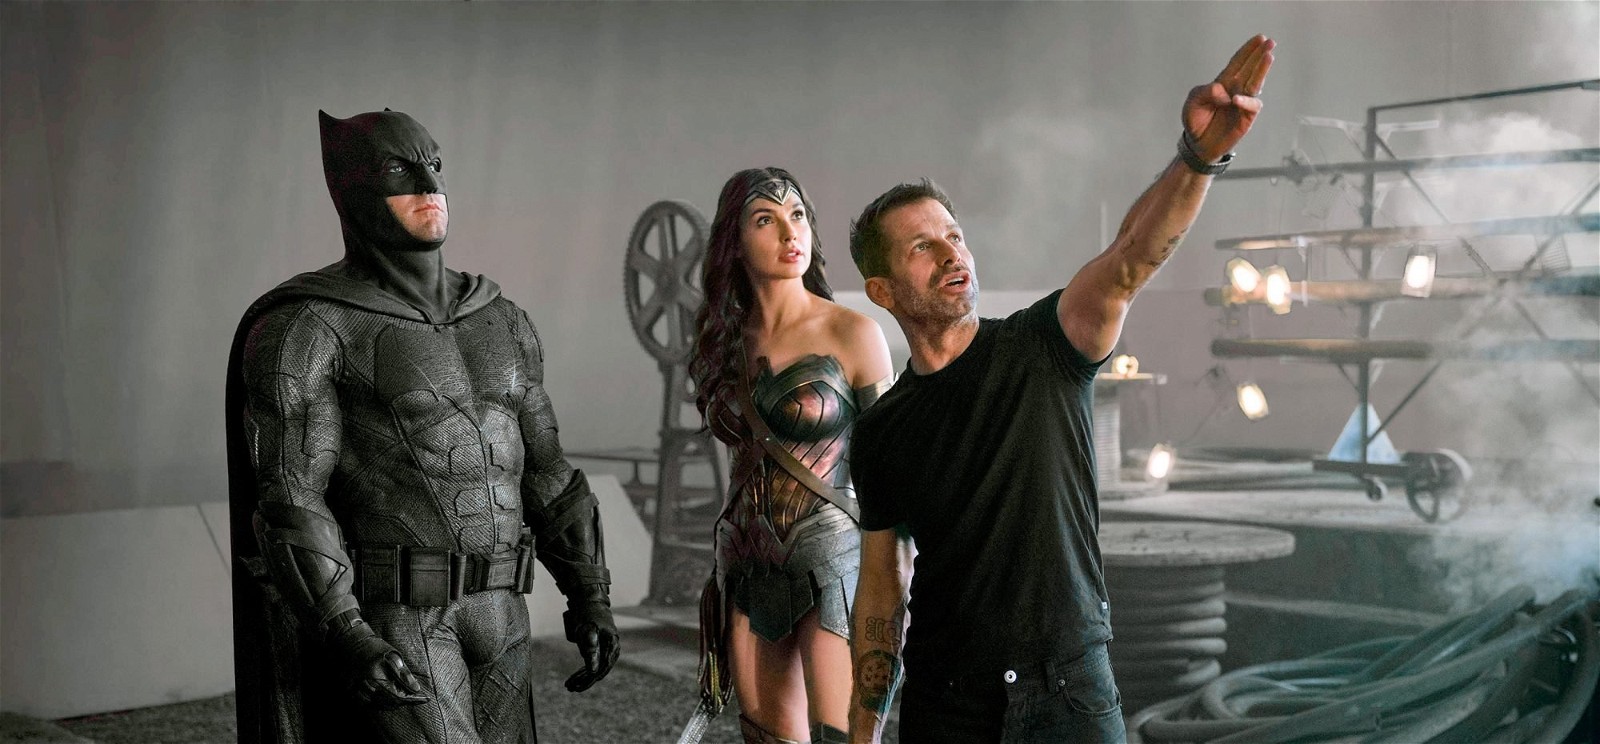 Zack Snyder was not given a free hand at DC, unlike James Gunn.